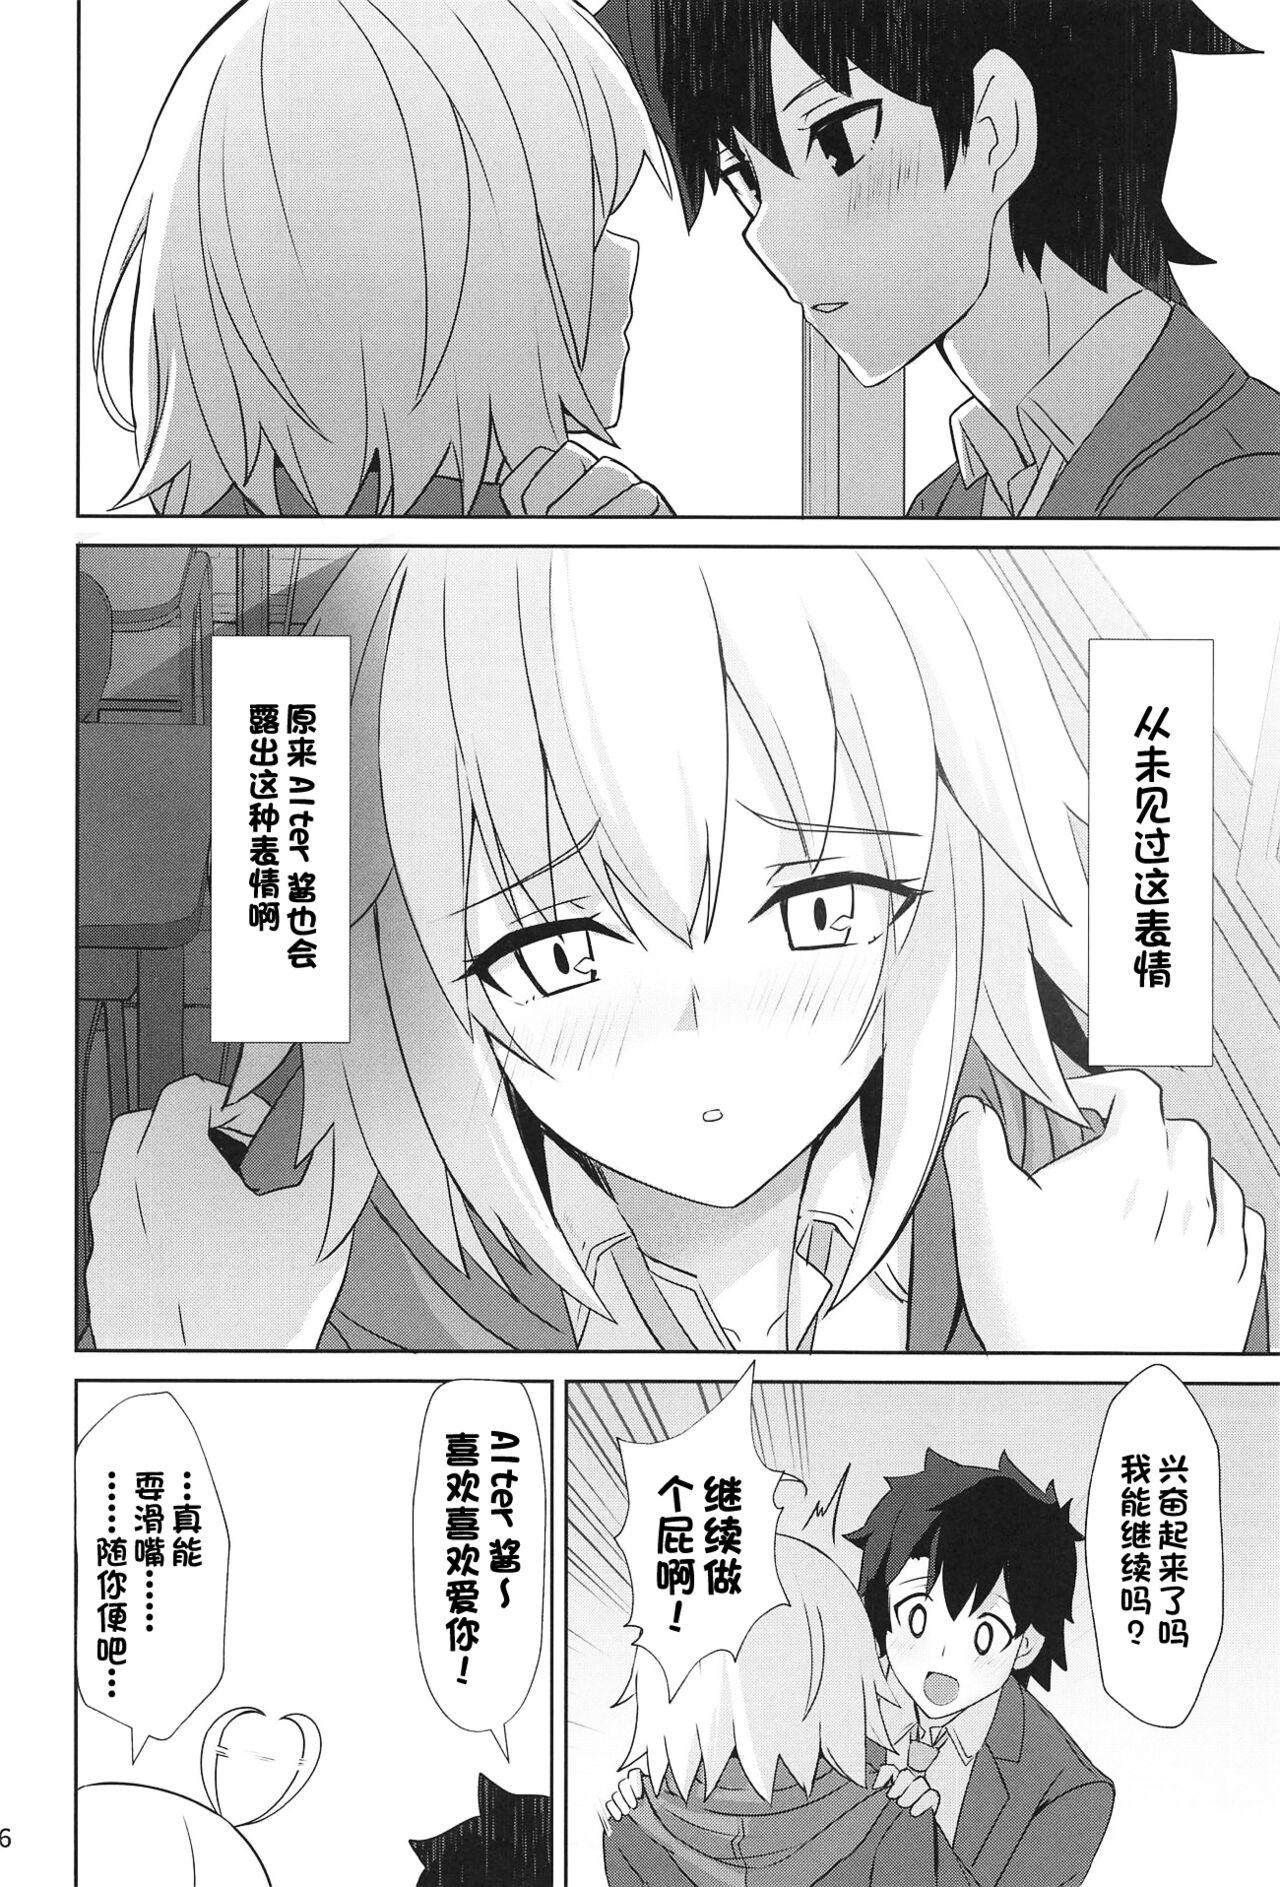 Red Head ときめきカルデア学園オルタナティ部 - Fate grand order Petite - Page 5